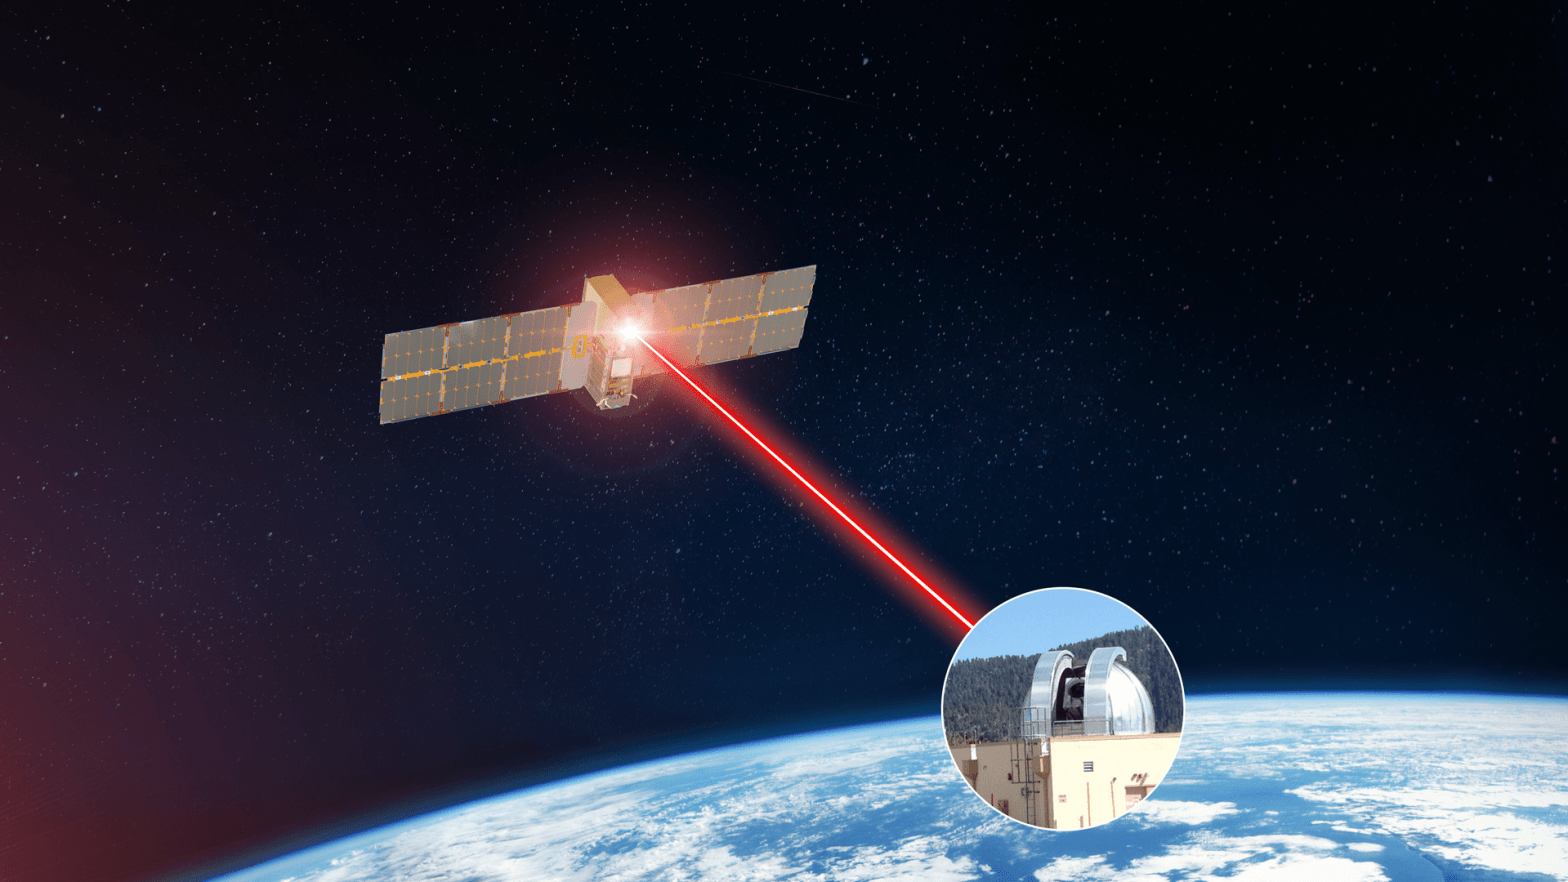 A space-to-ground optical link between a satellite in orbit and Earth relayed data at 200 gigabit per second. (Illustration: NASA)